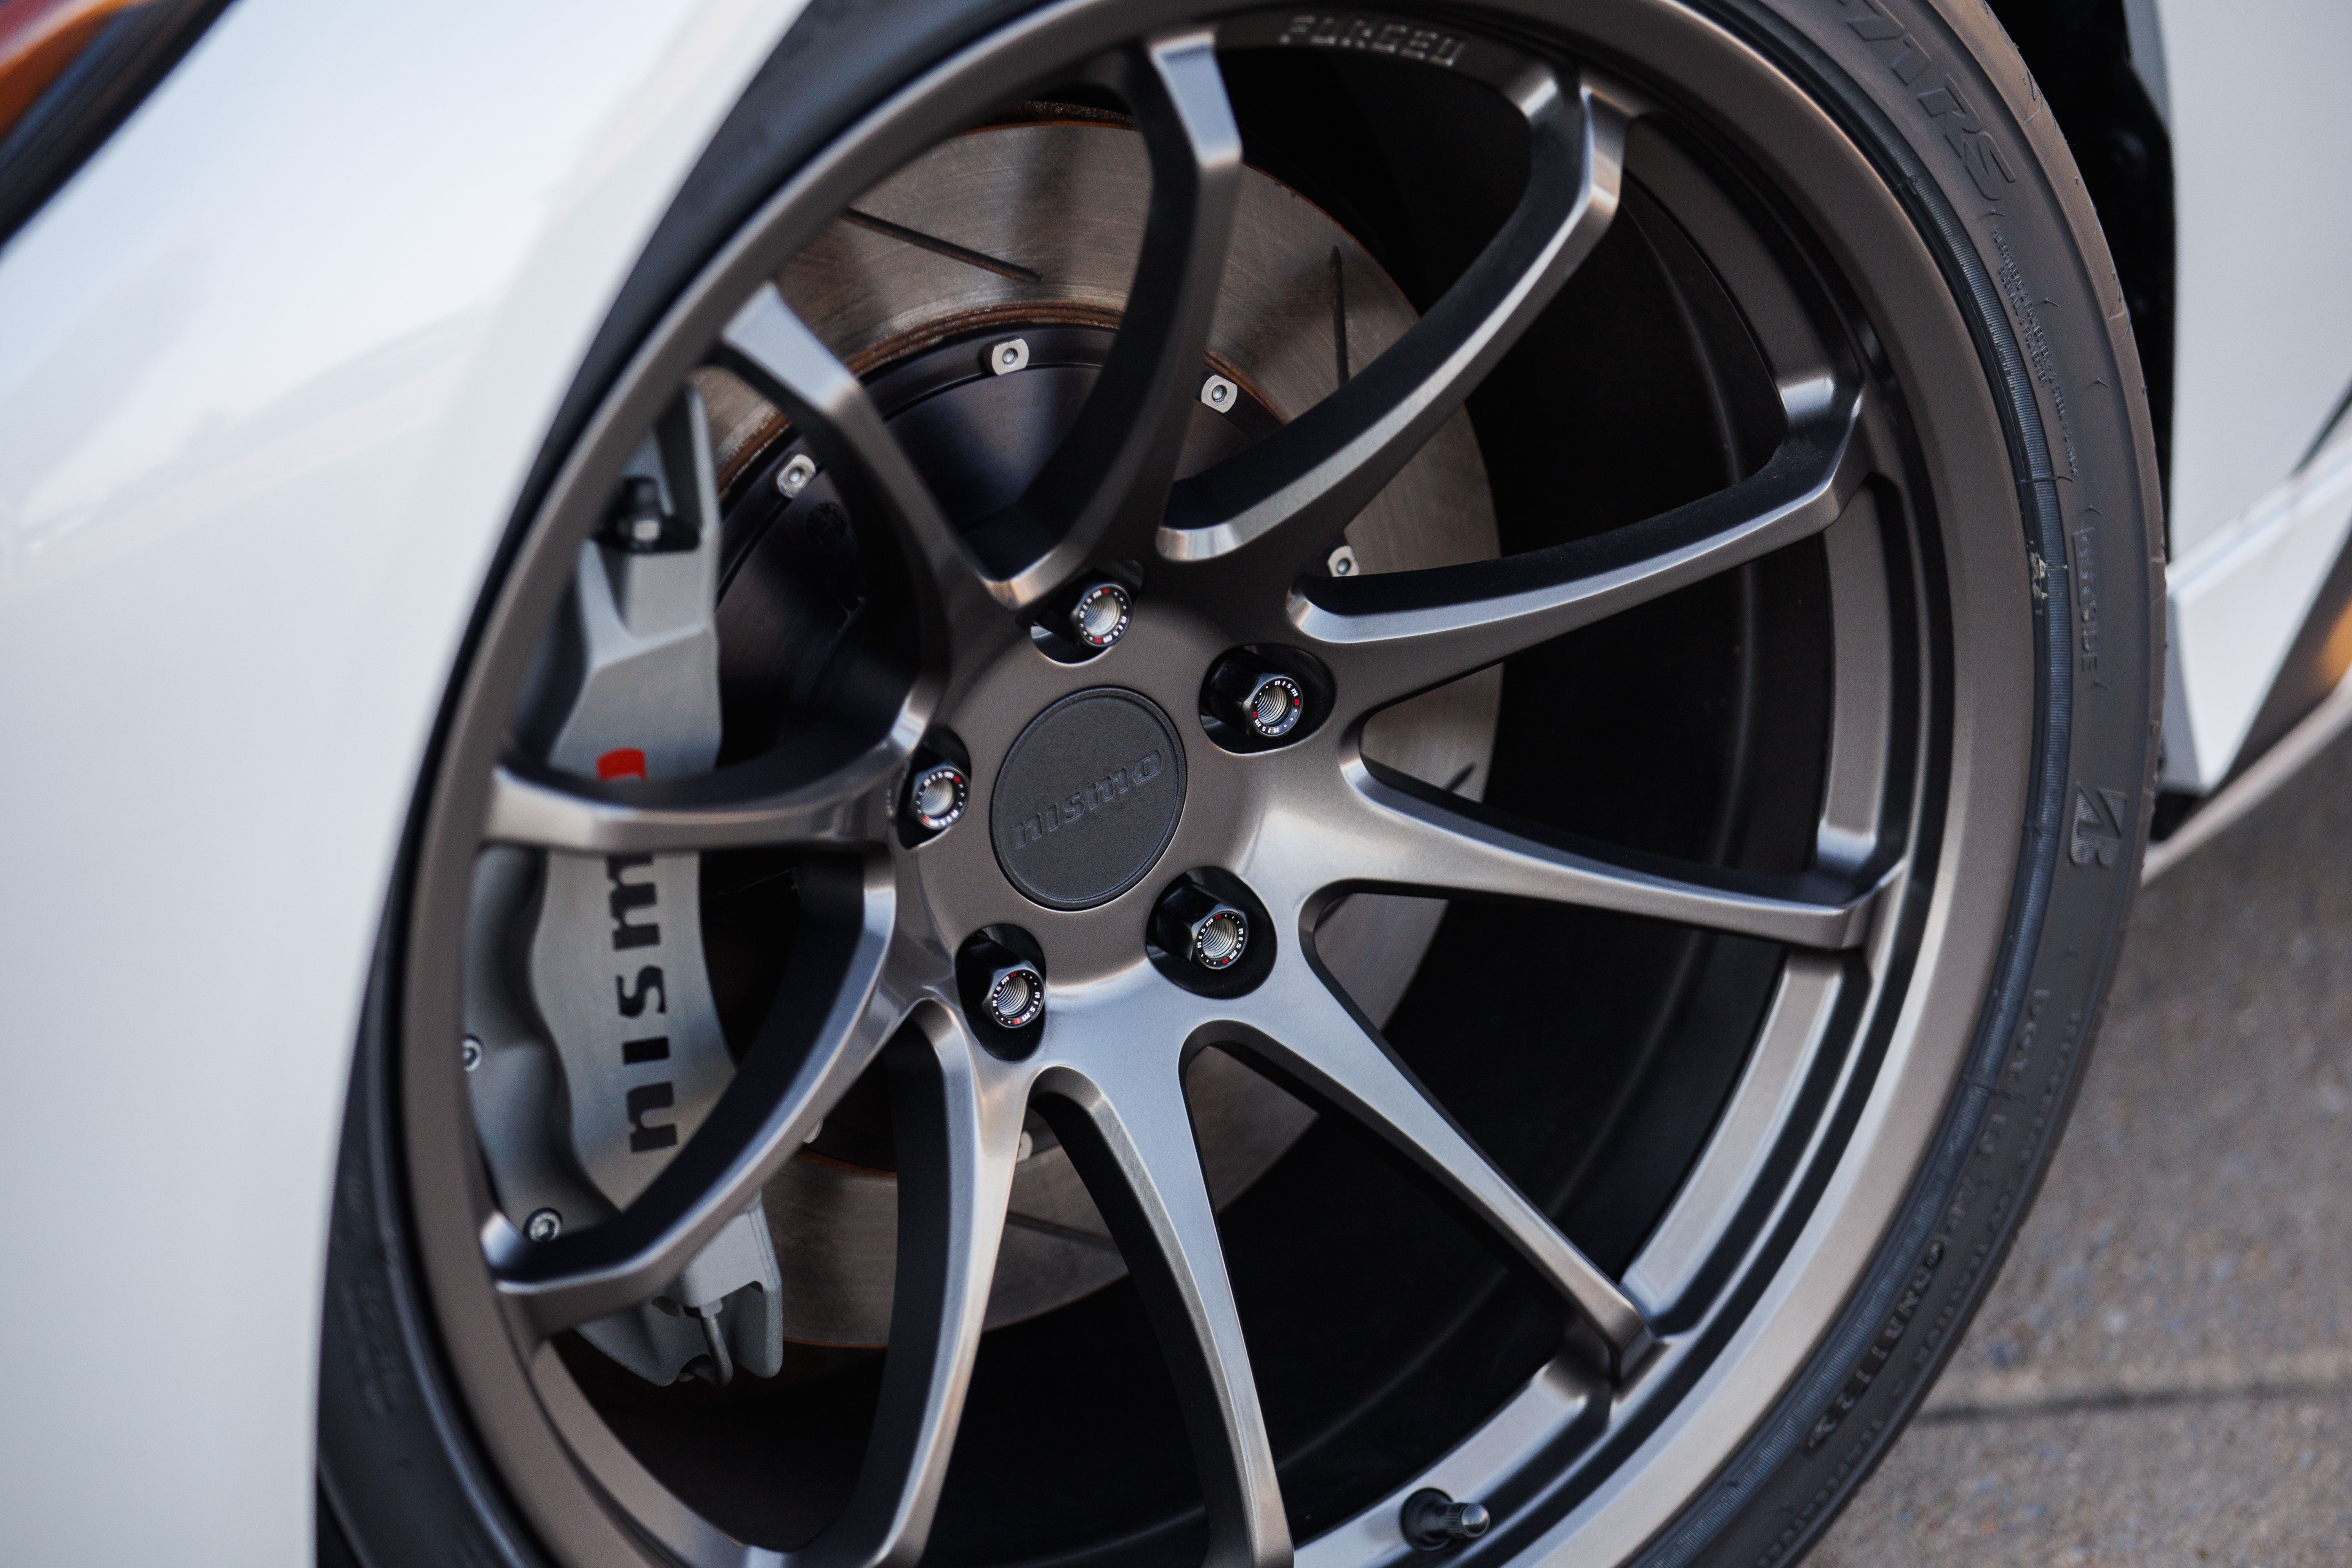 Nismo LM-RS1 Wheels 19" 9.5/10.5 5x114.3 - Available in Anthracite, Black, & Bronze